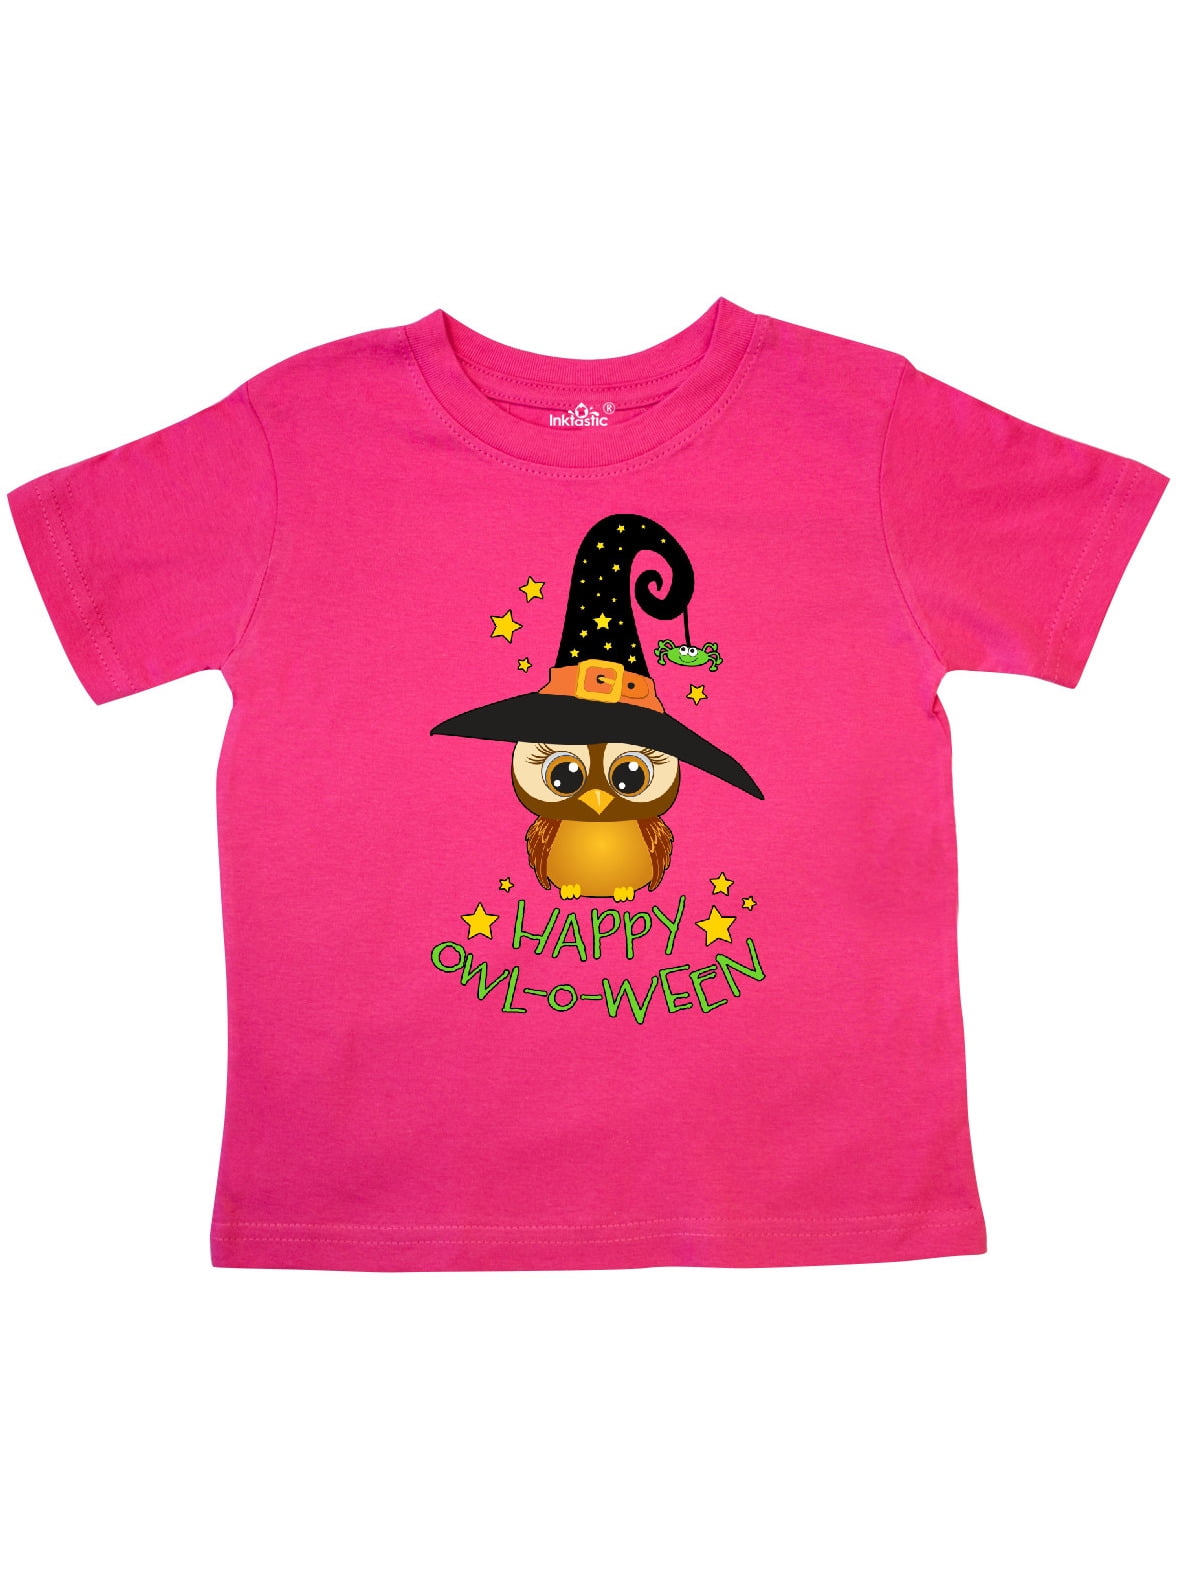 inktastic Halloween Lil Sister with Owl and Stars Toddler T-Shirt 